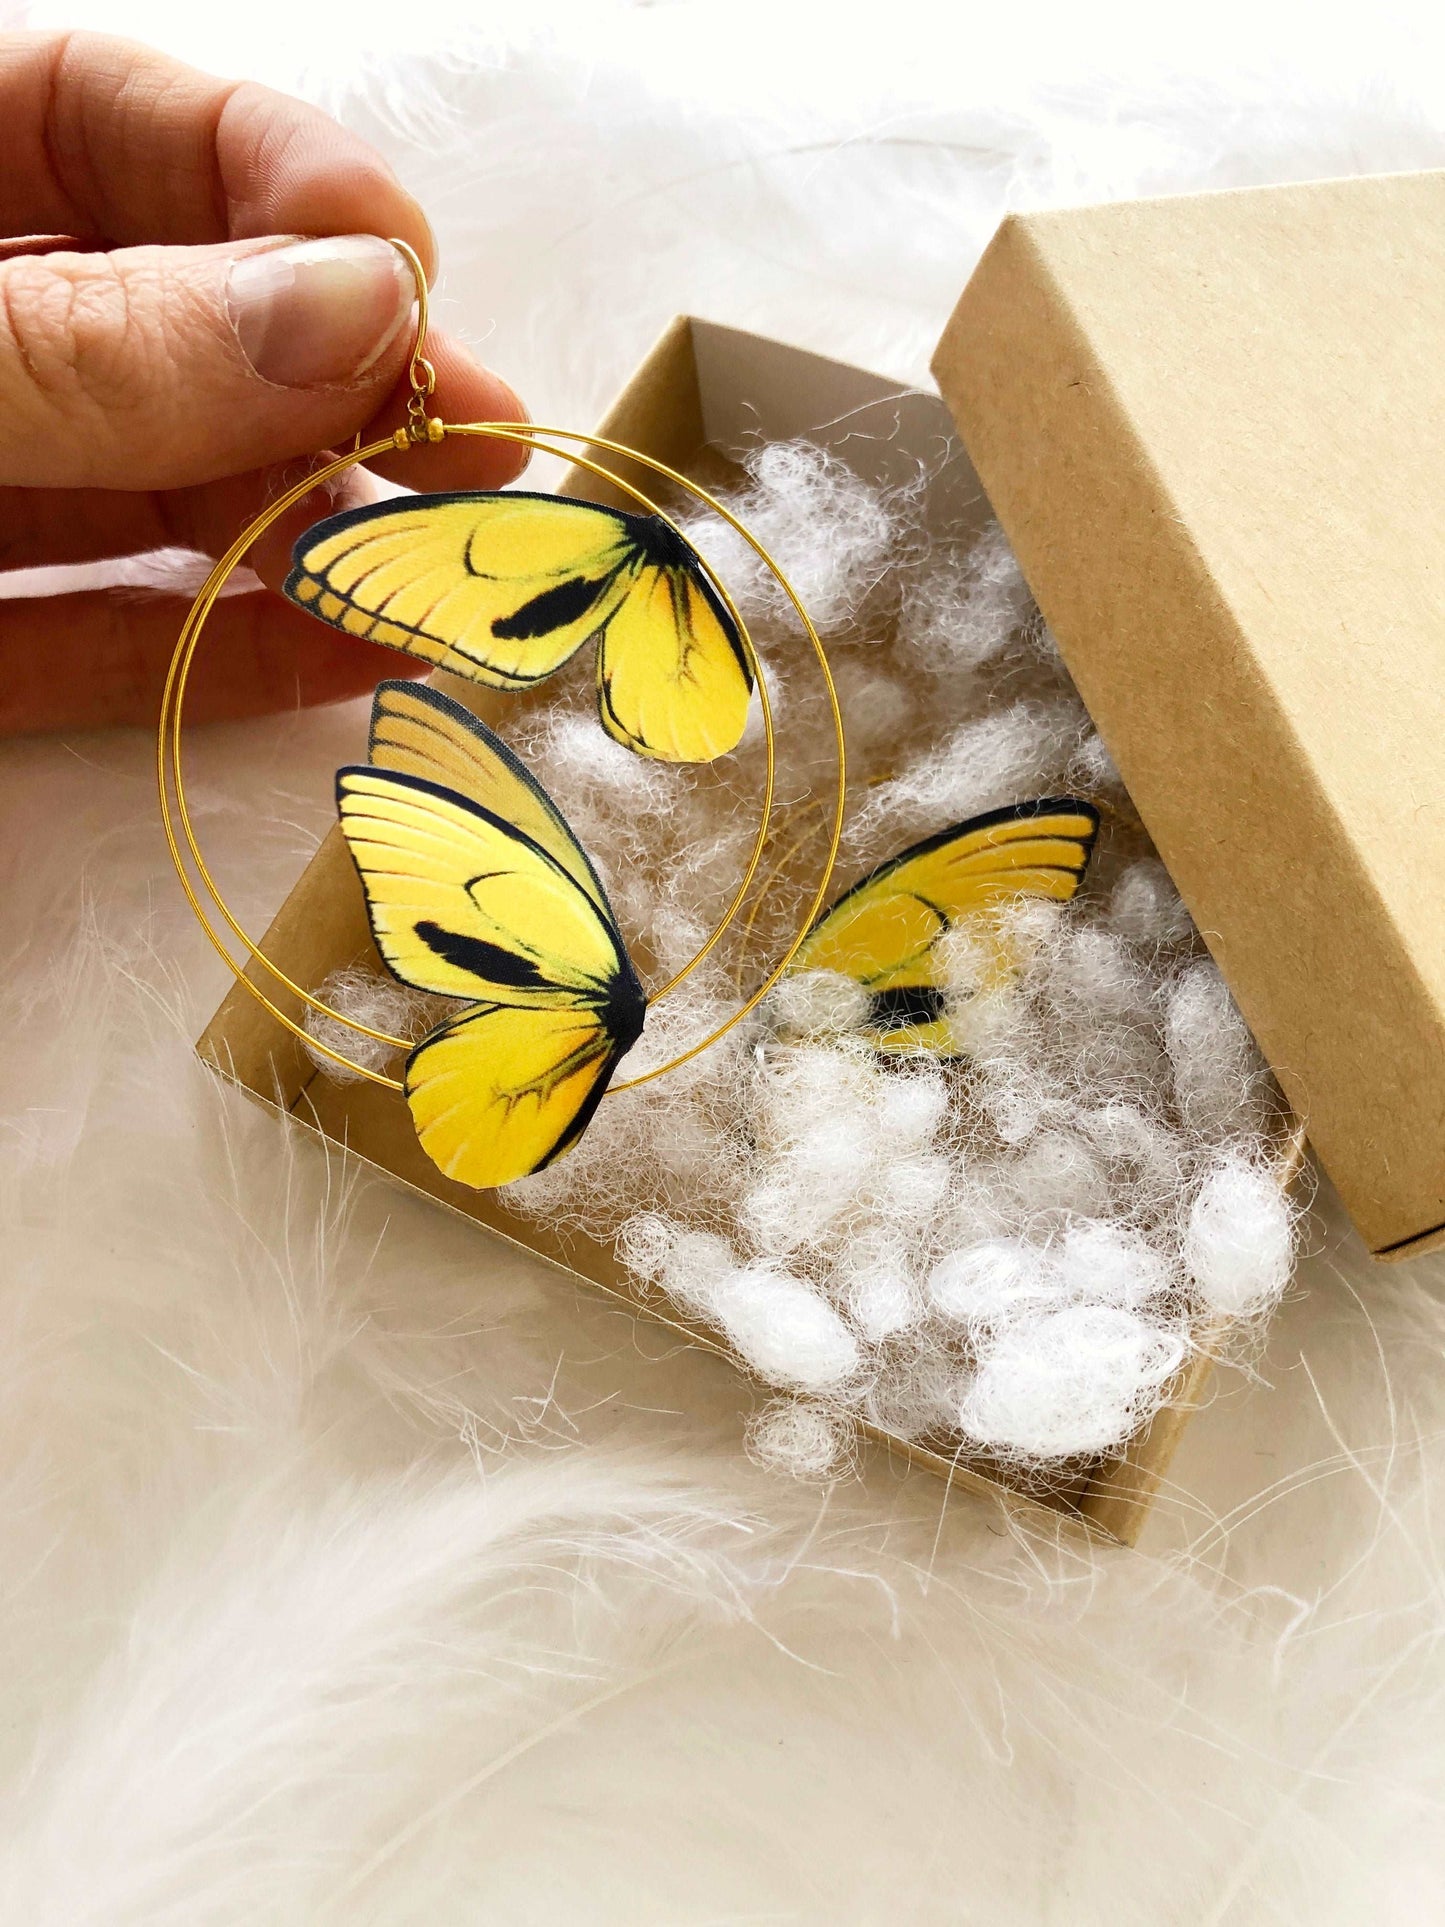 Hand Holds Double Hoop Earrings with Yellow Butterflies in Craft Box on White Feathers